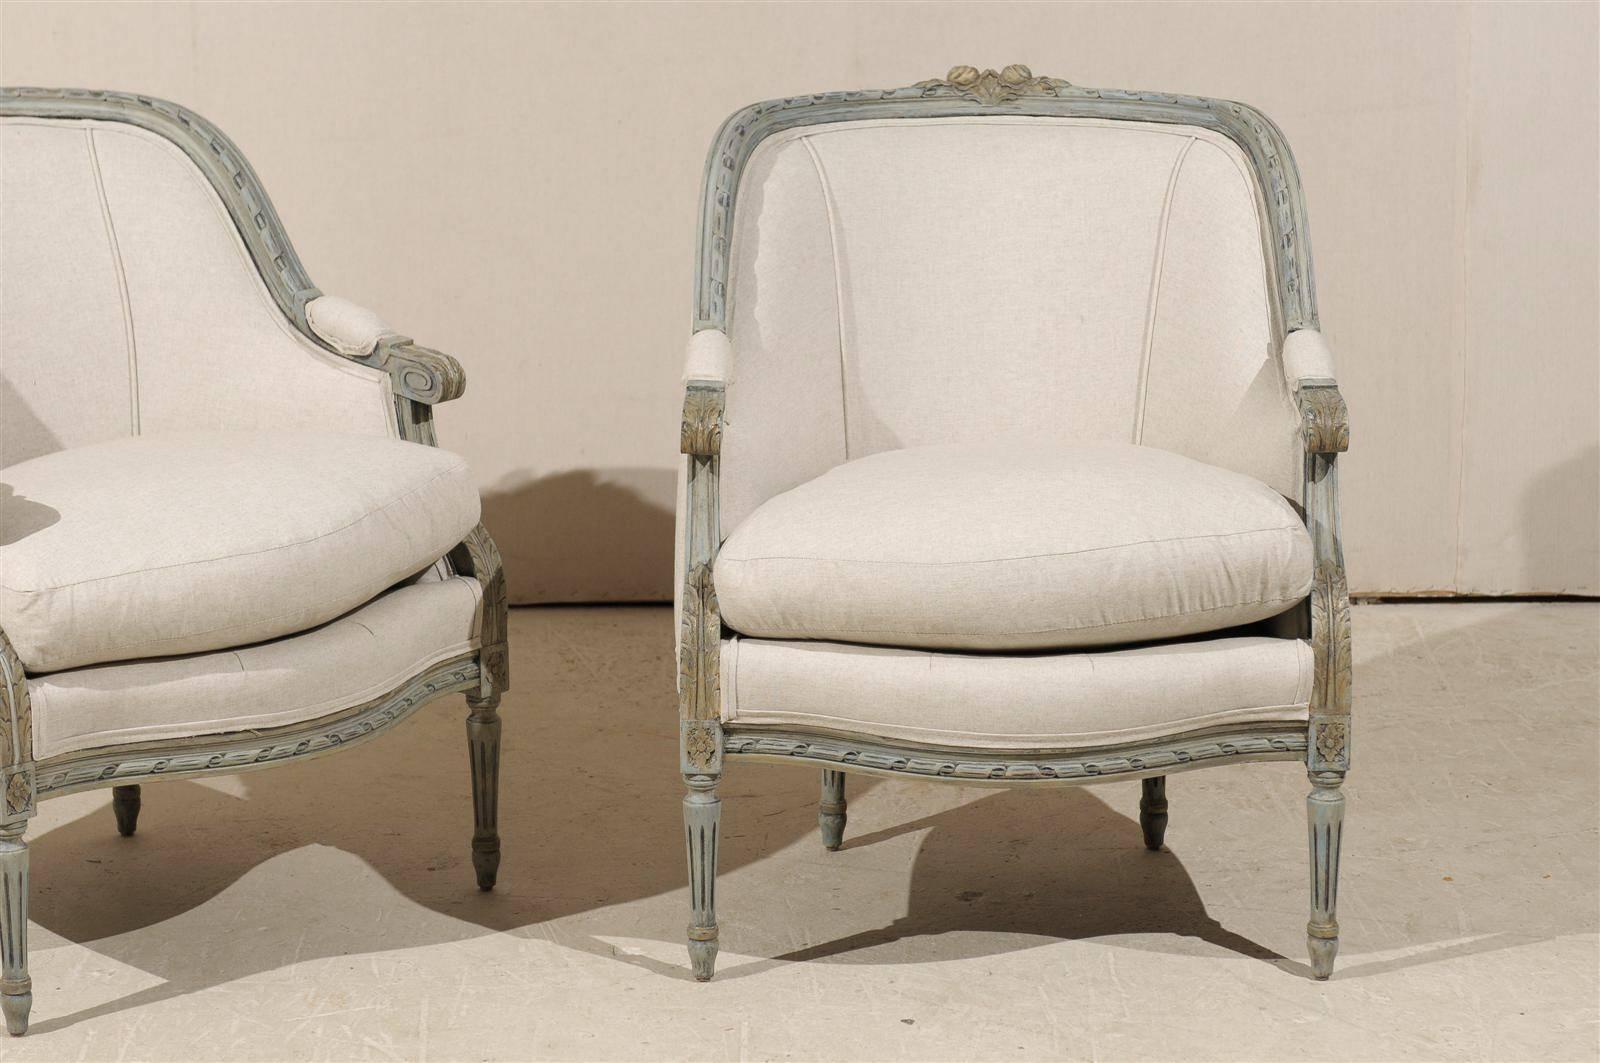 20th Century Pair of French Louis XVI Style Painted Wood Barrelback Armchairs